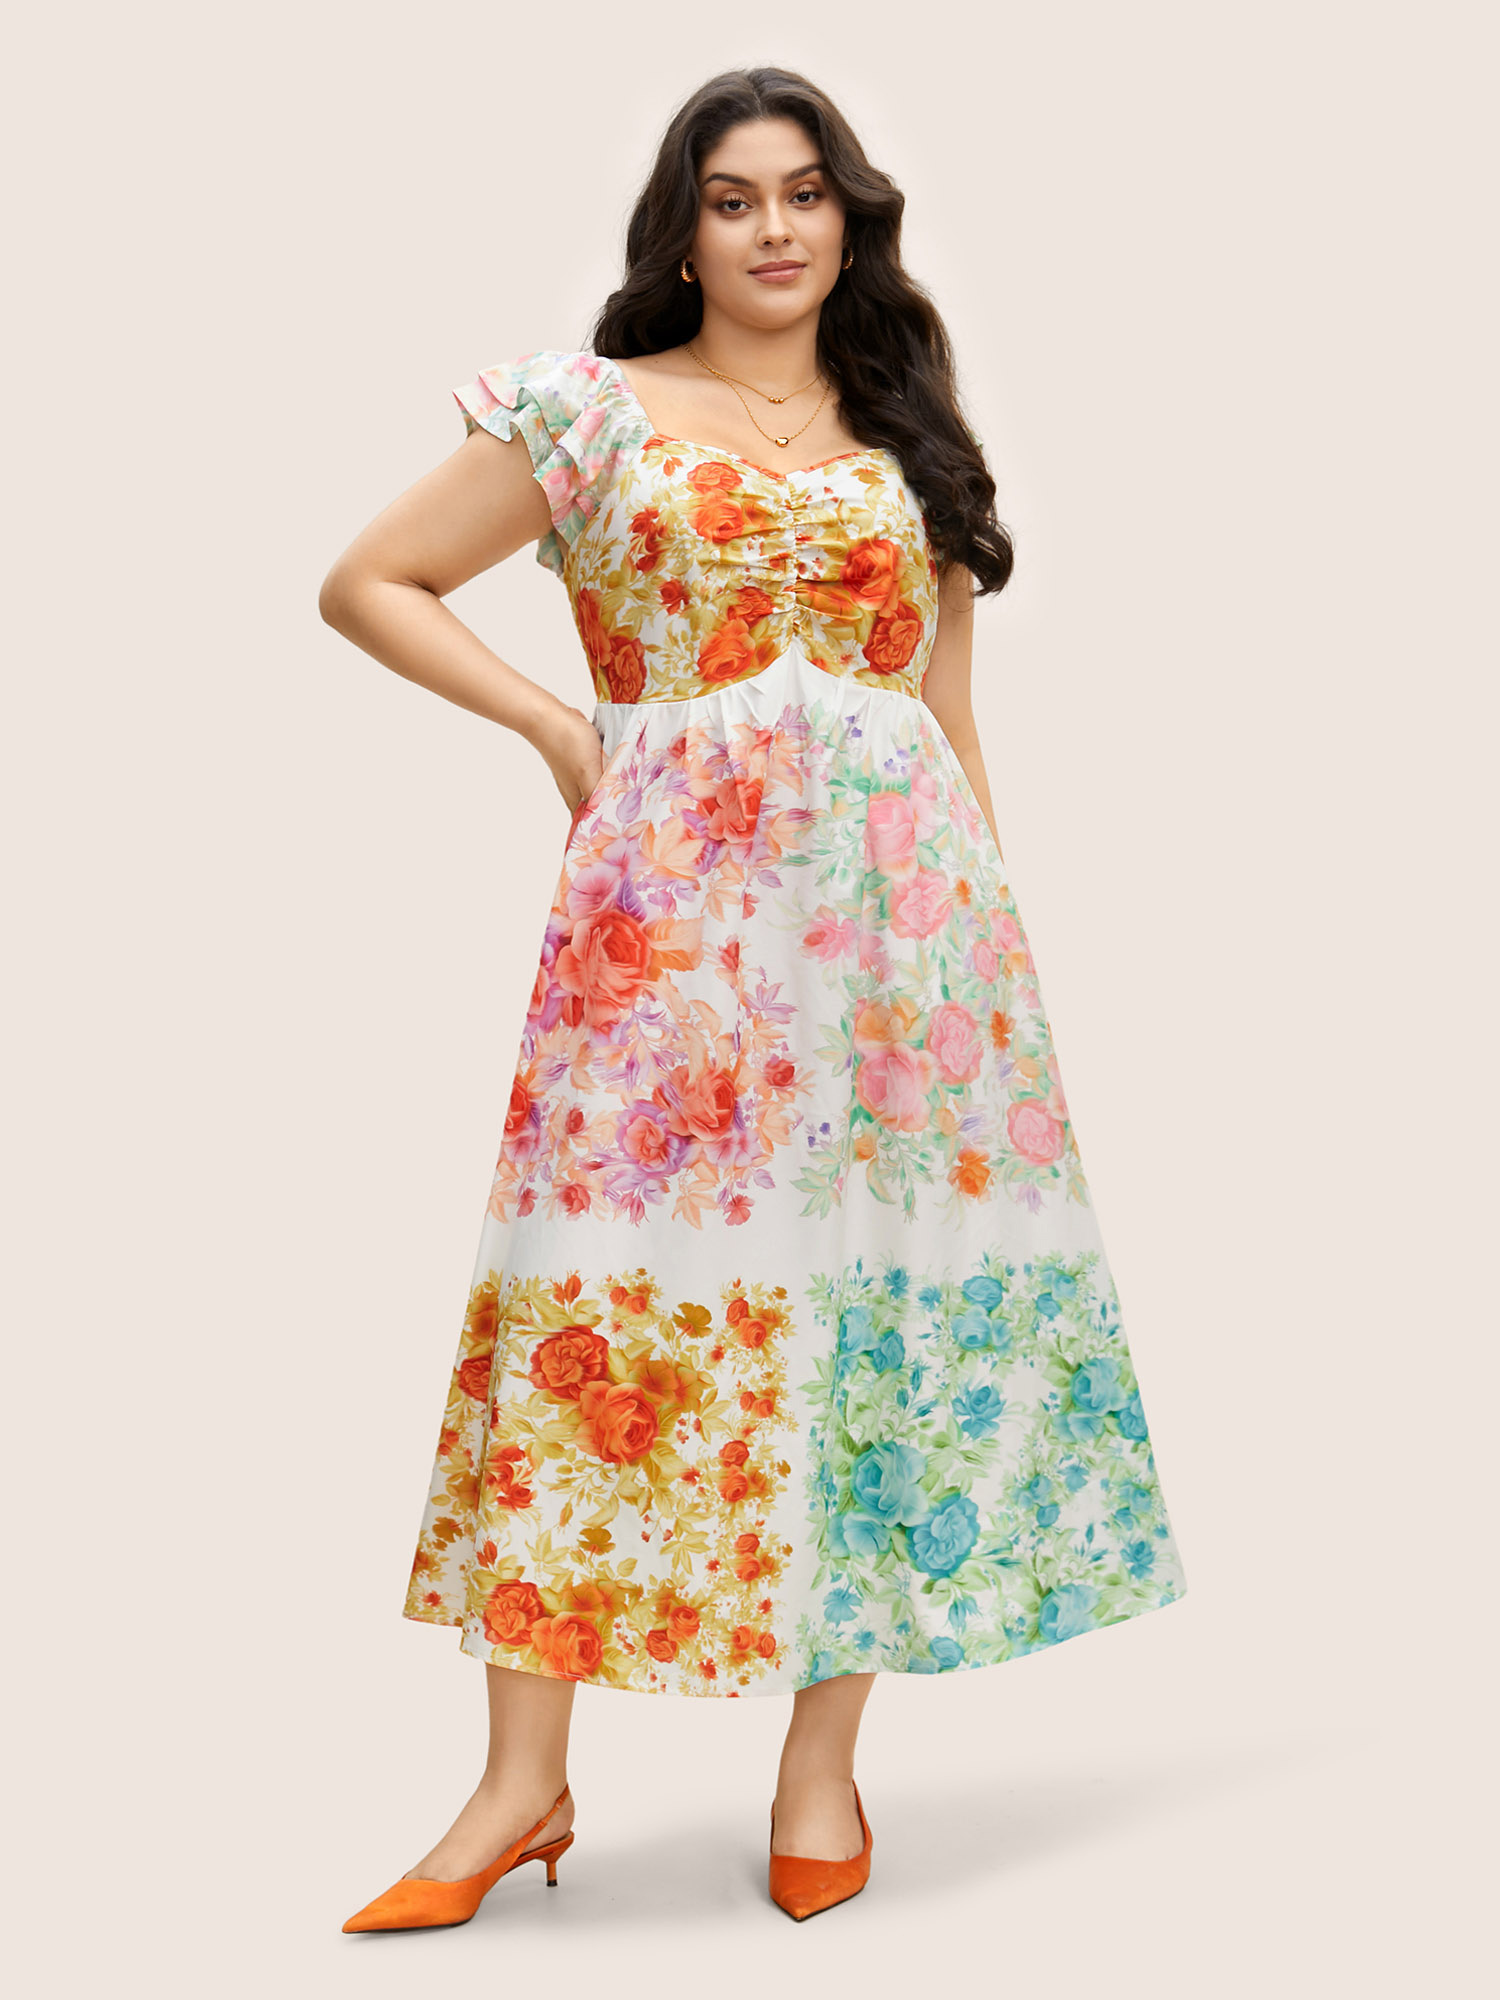 

Plus Size Patchwork Floral Tiered Ruffle Sleeve Dress Multicolor Women Gathered Heart neckline Cap Sleeve Curvy BloomChic